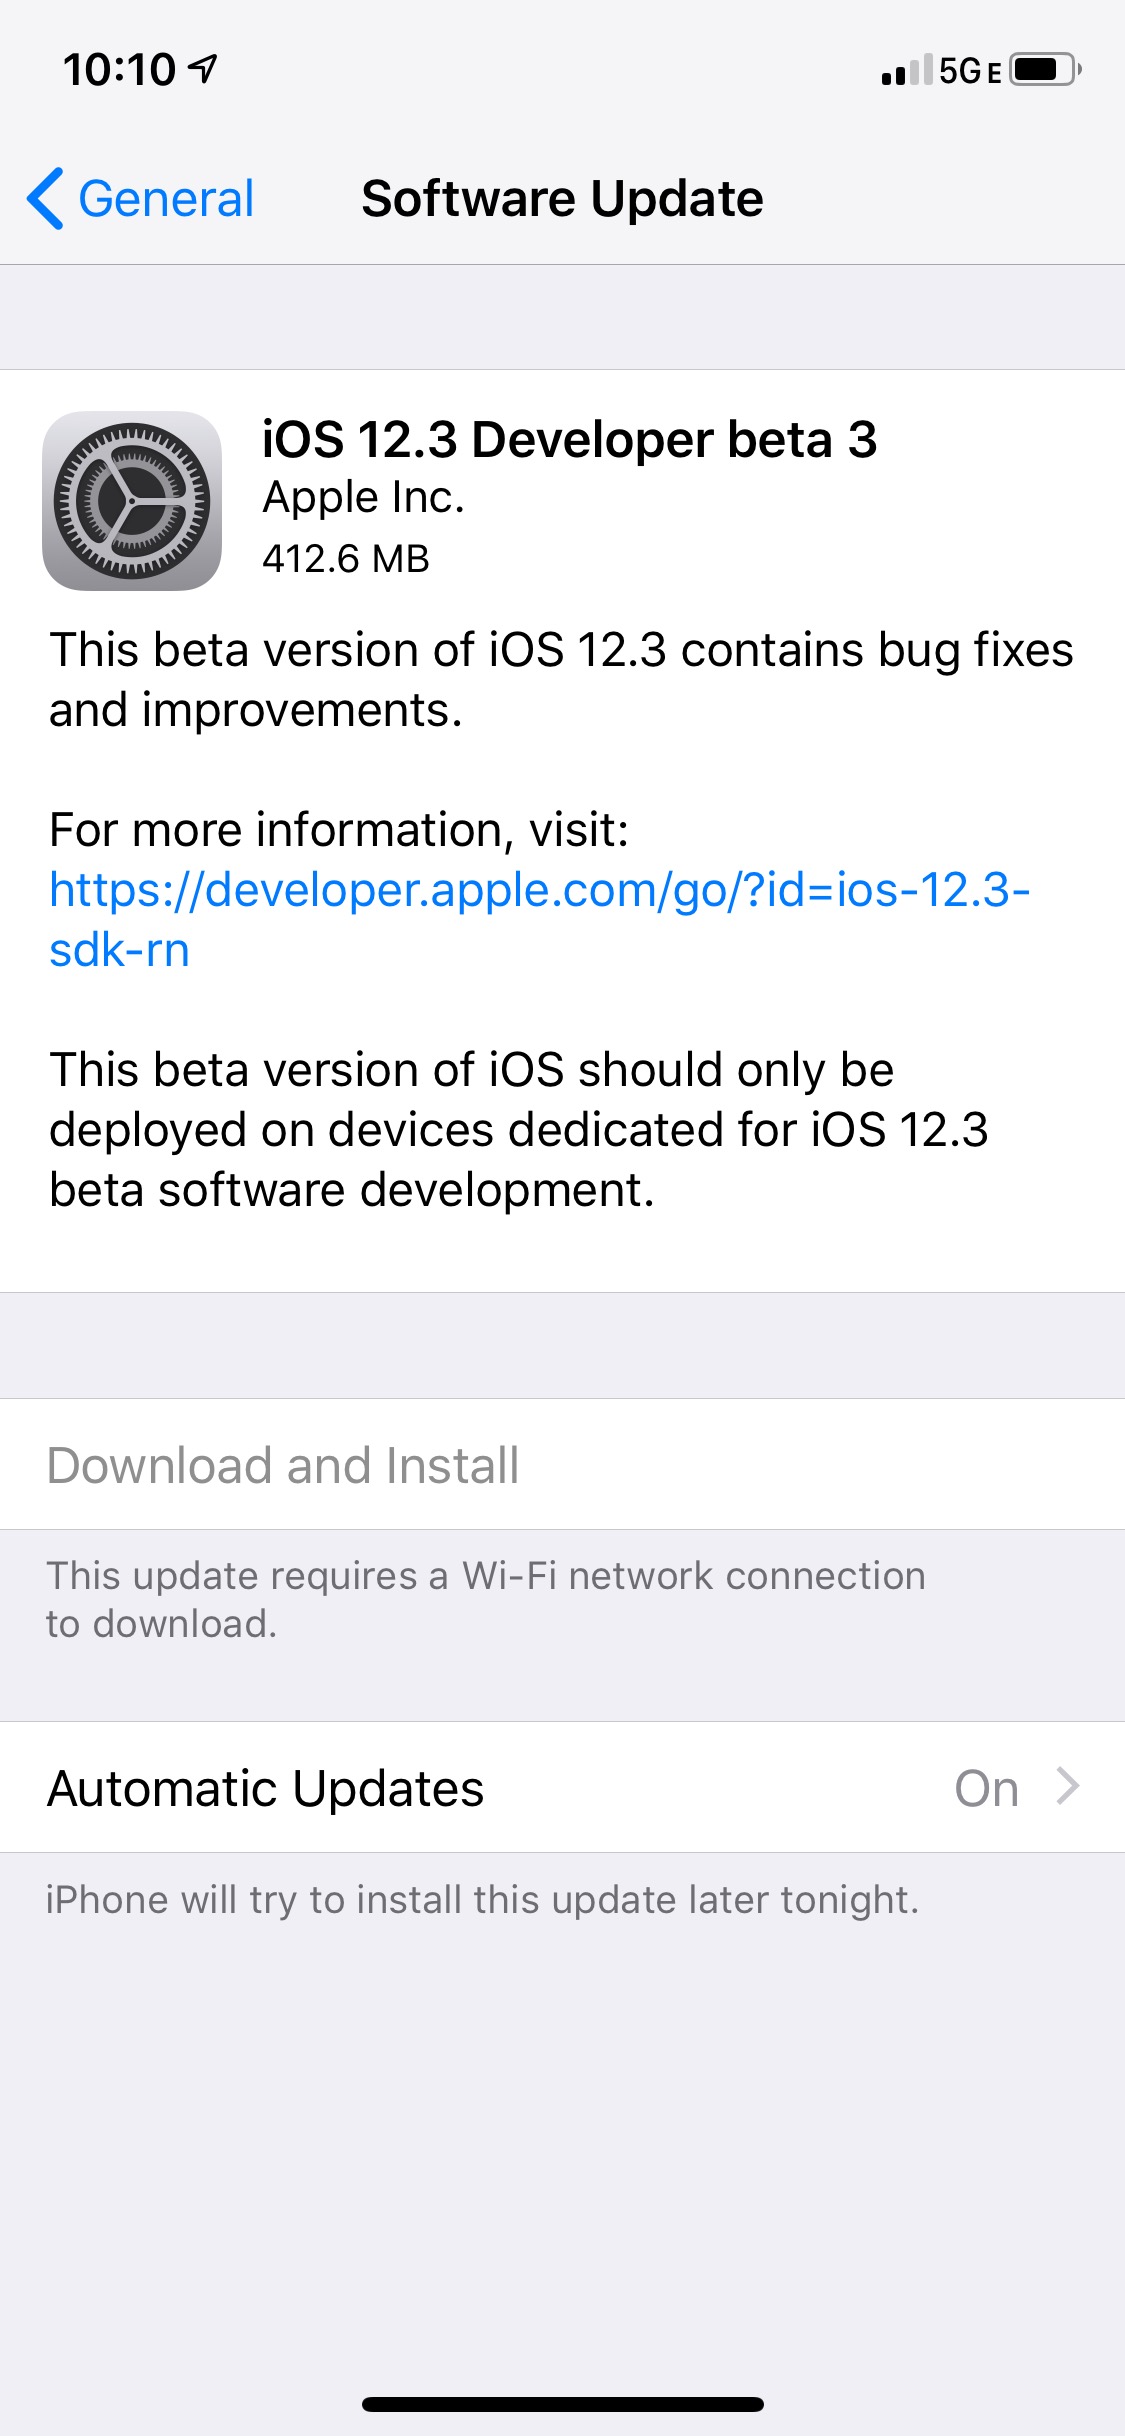 Apple Releases iOS 12.3 Beta 3 to Developers [Download]